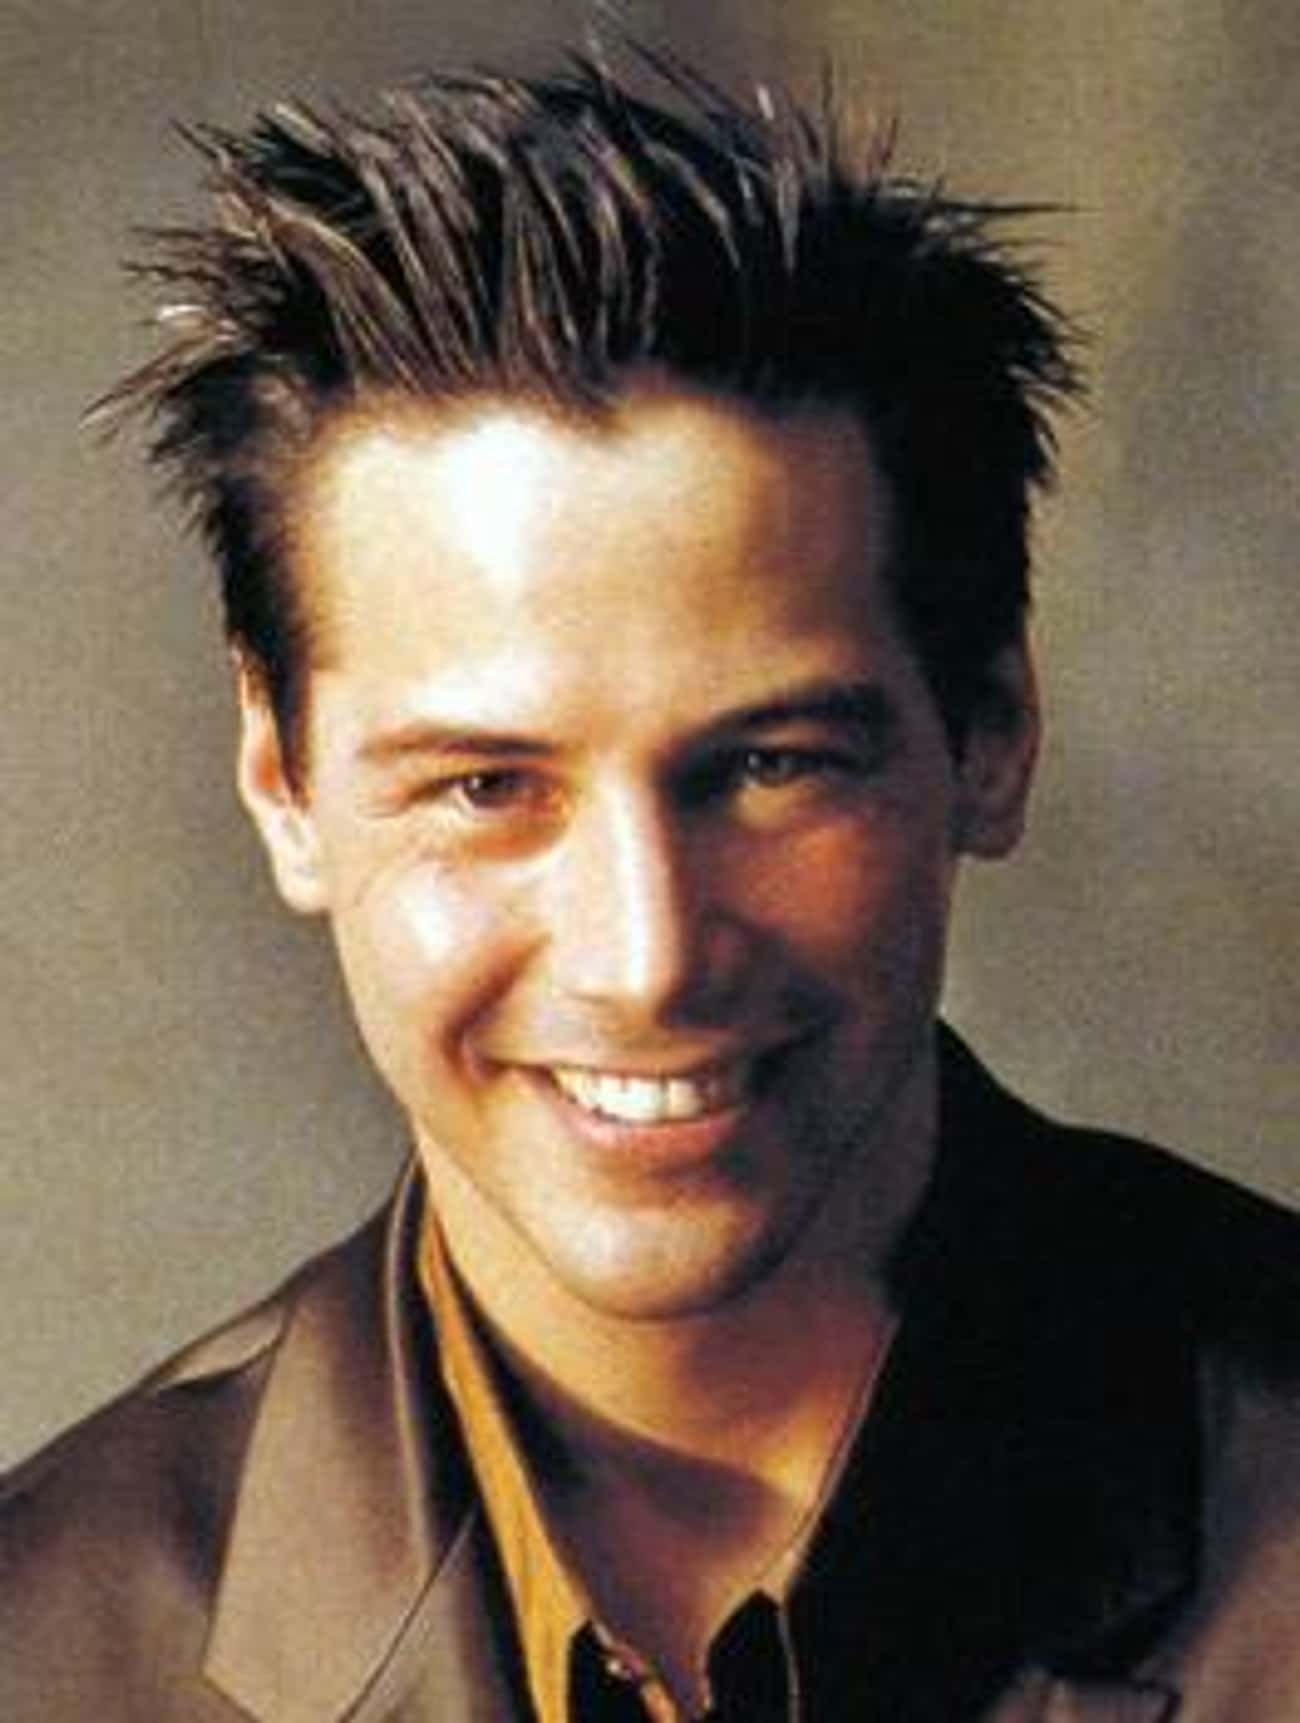 Young Keanu Reeves Pic with Spiked Hair